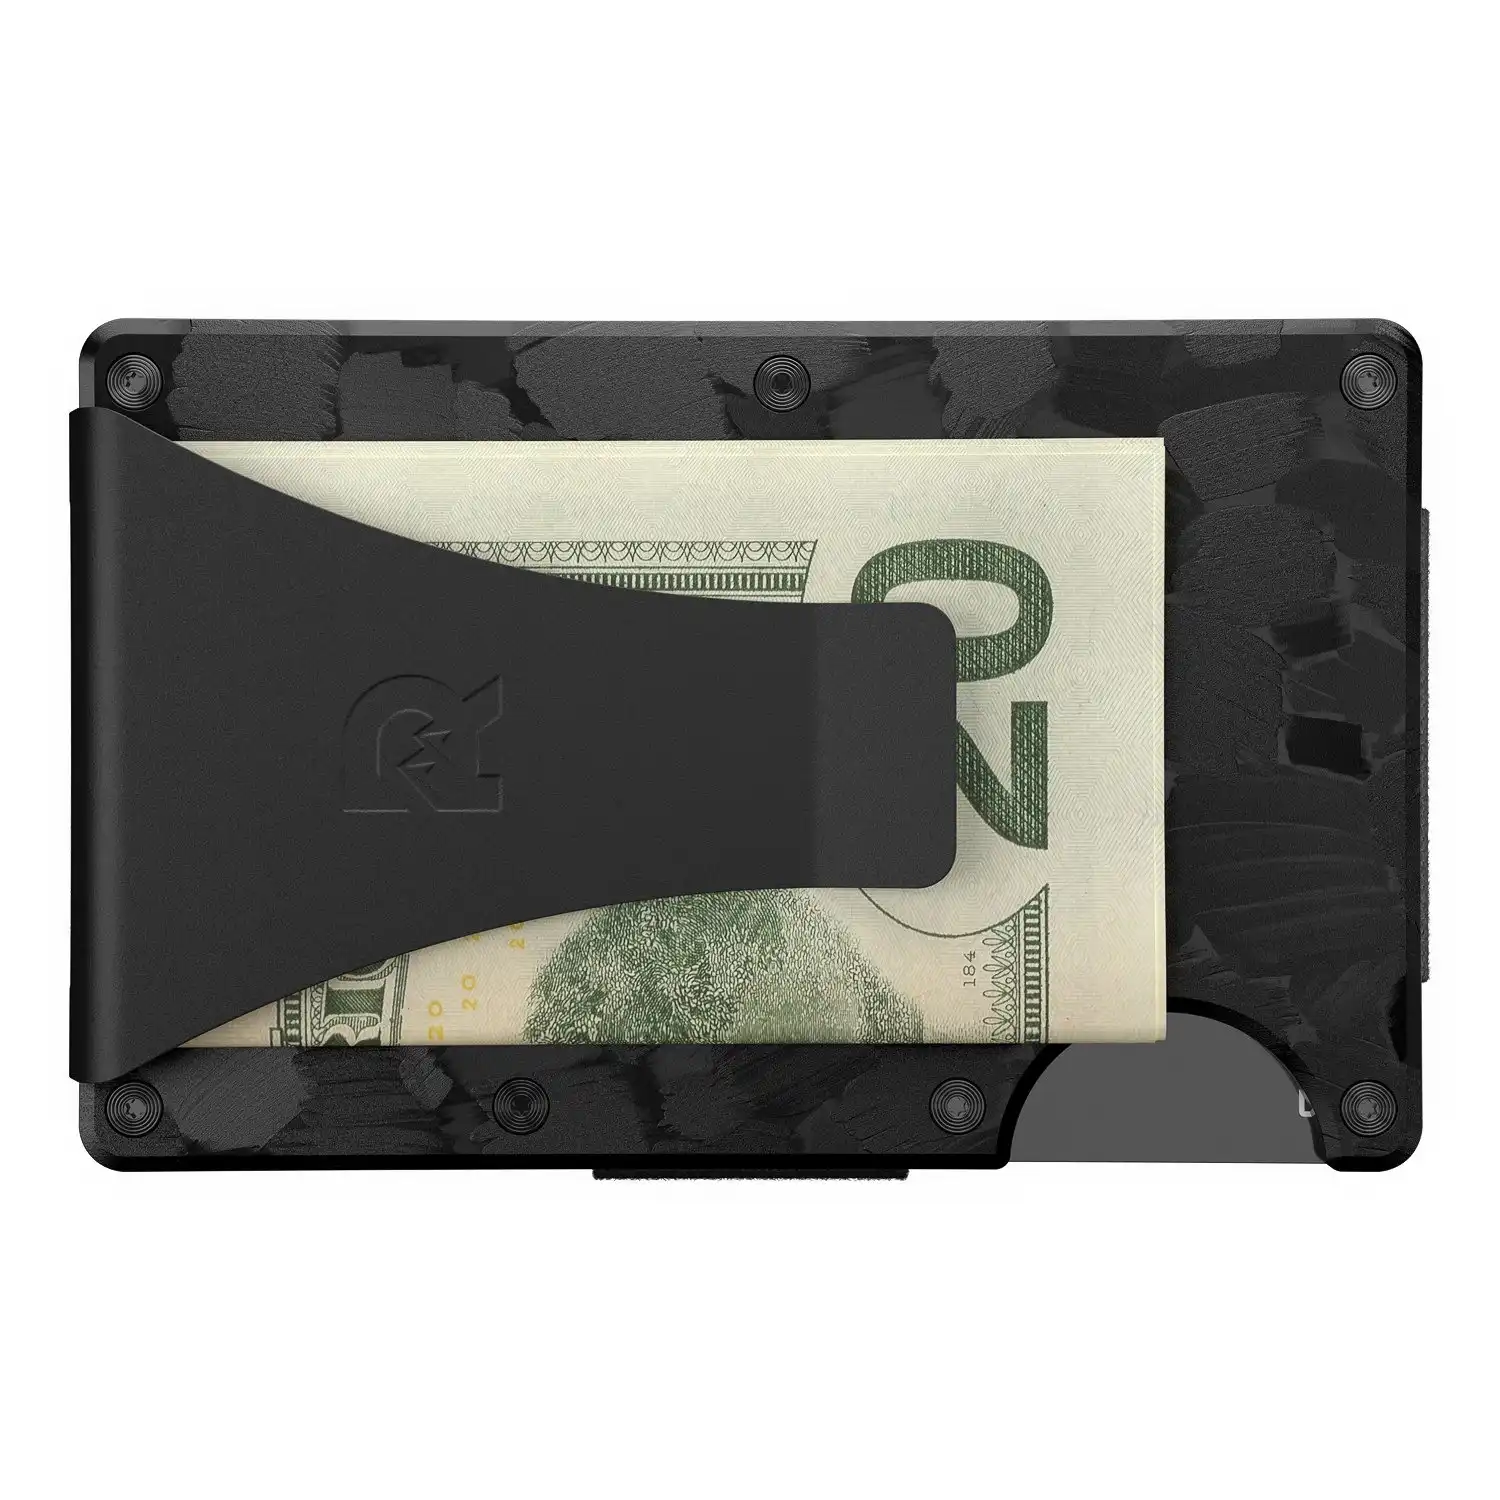 The Ridge Forged Carbon Wallet + Money Clip